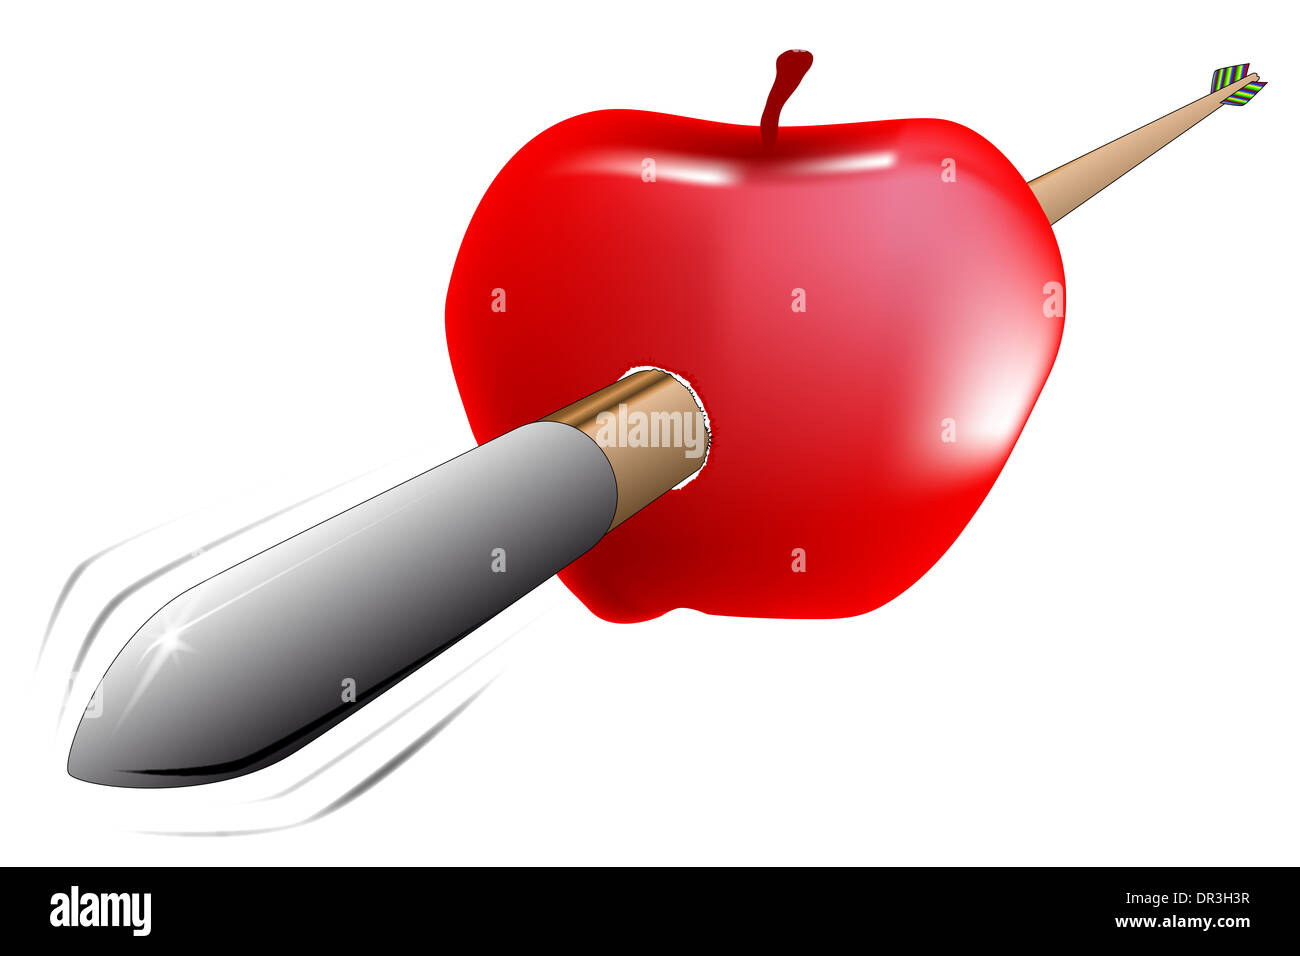 A arrow in flight shot through a red apple as per 'William Tell'. Stock Photo